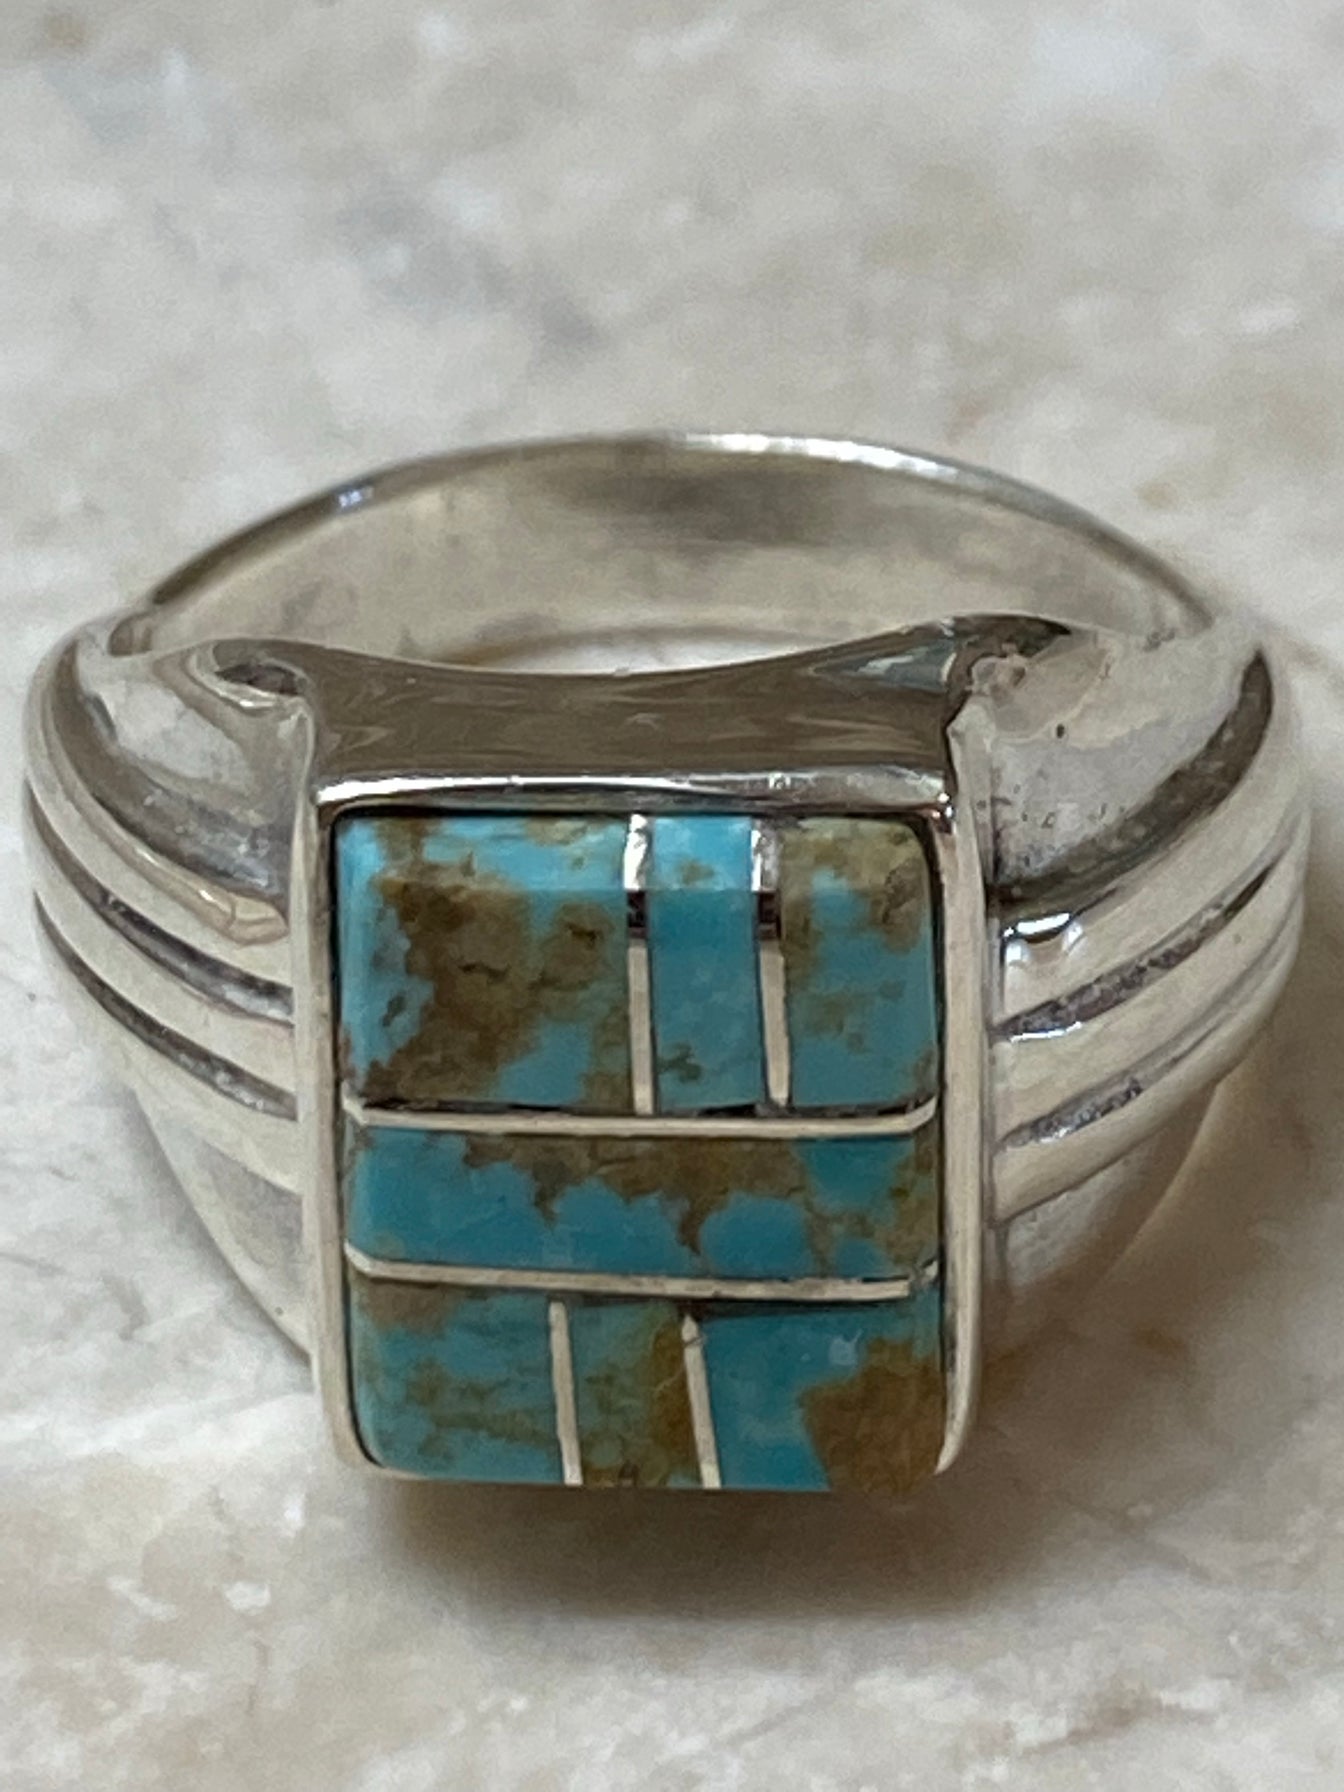 Spider Web Turquoise #8 & Sterling Silver Rectangle Signet Ring Size 8.25